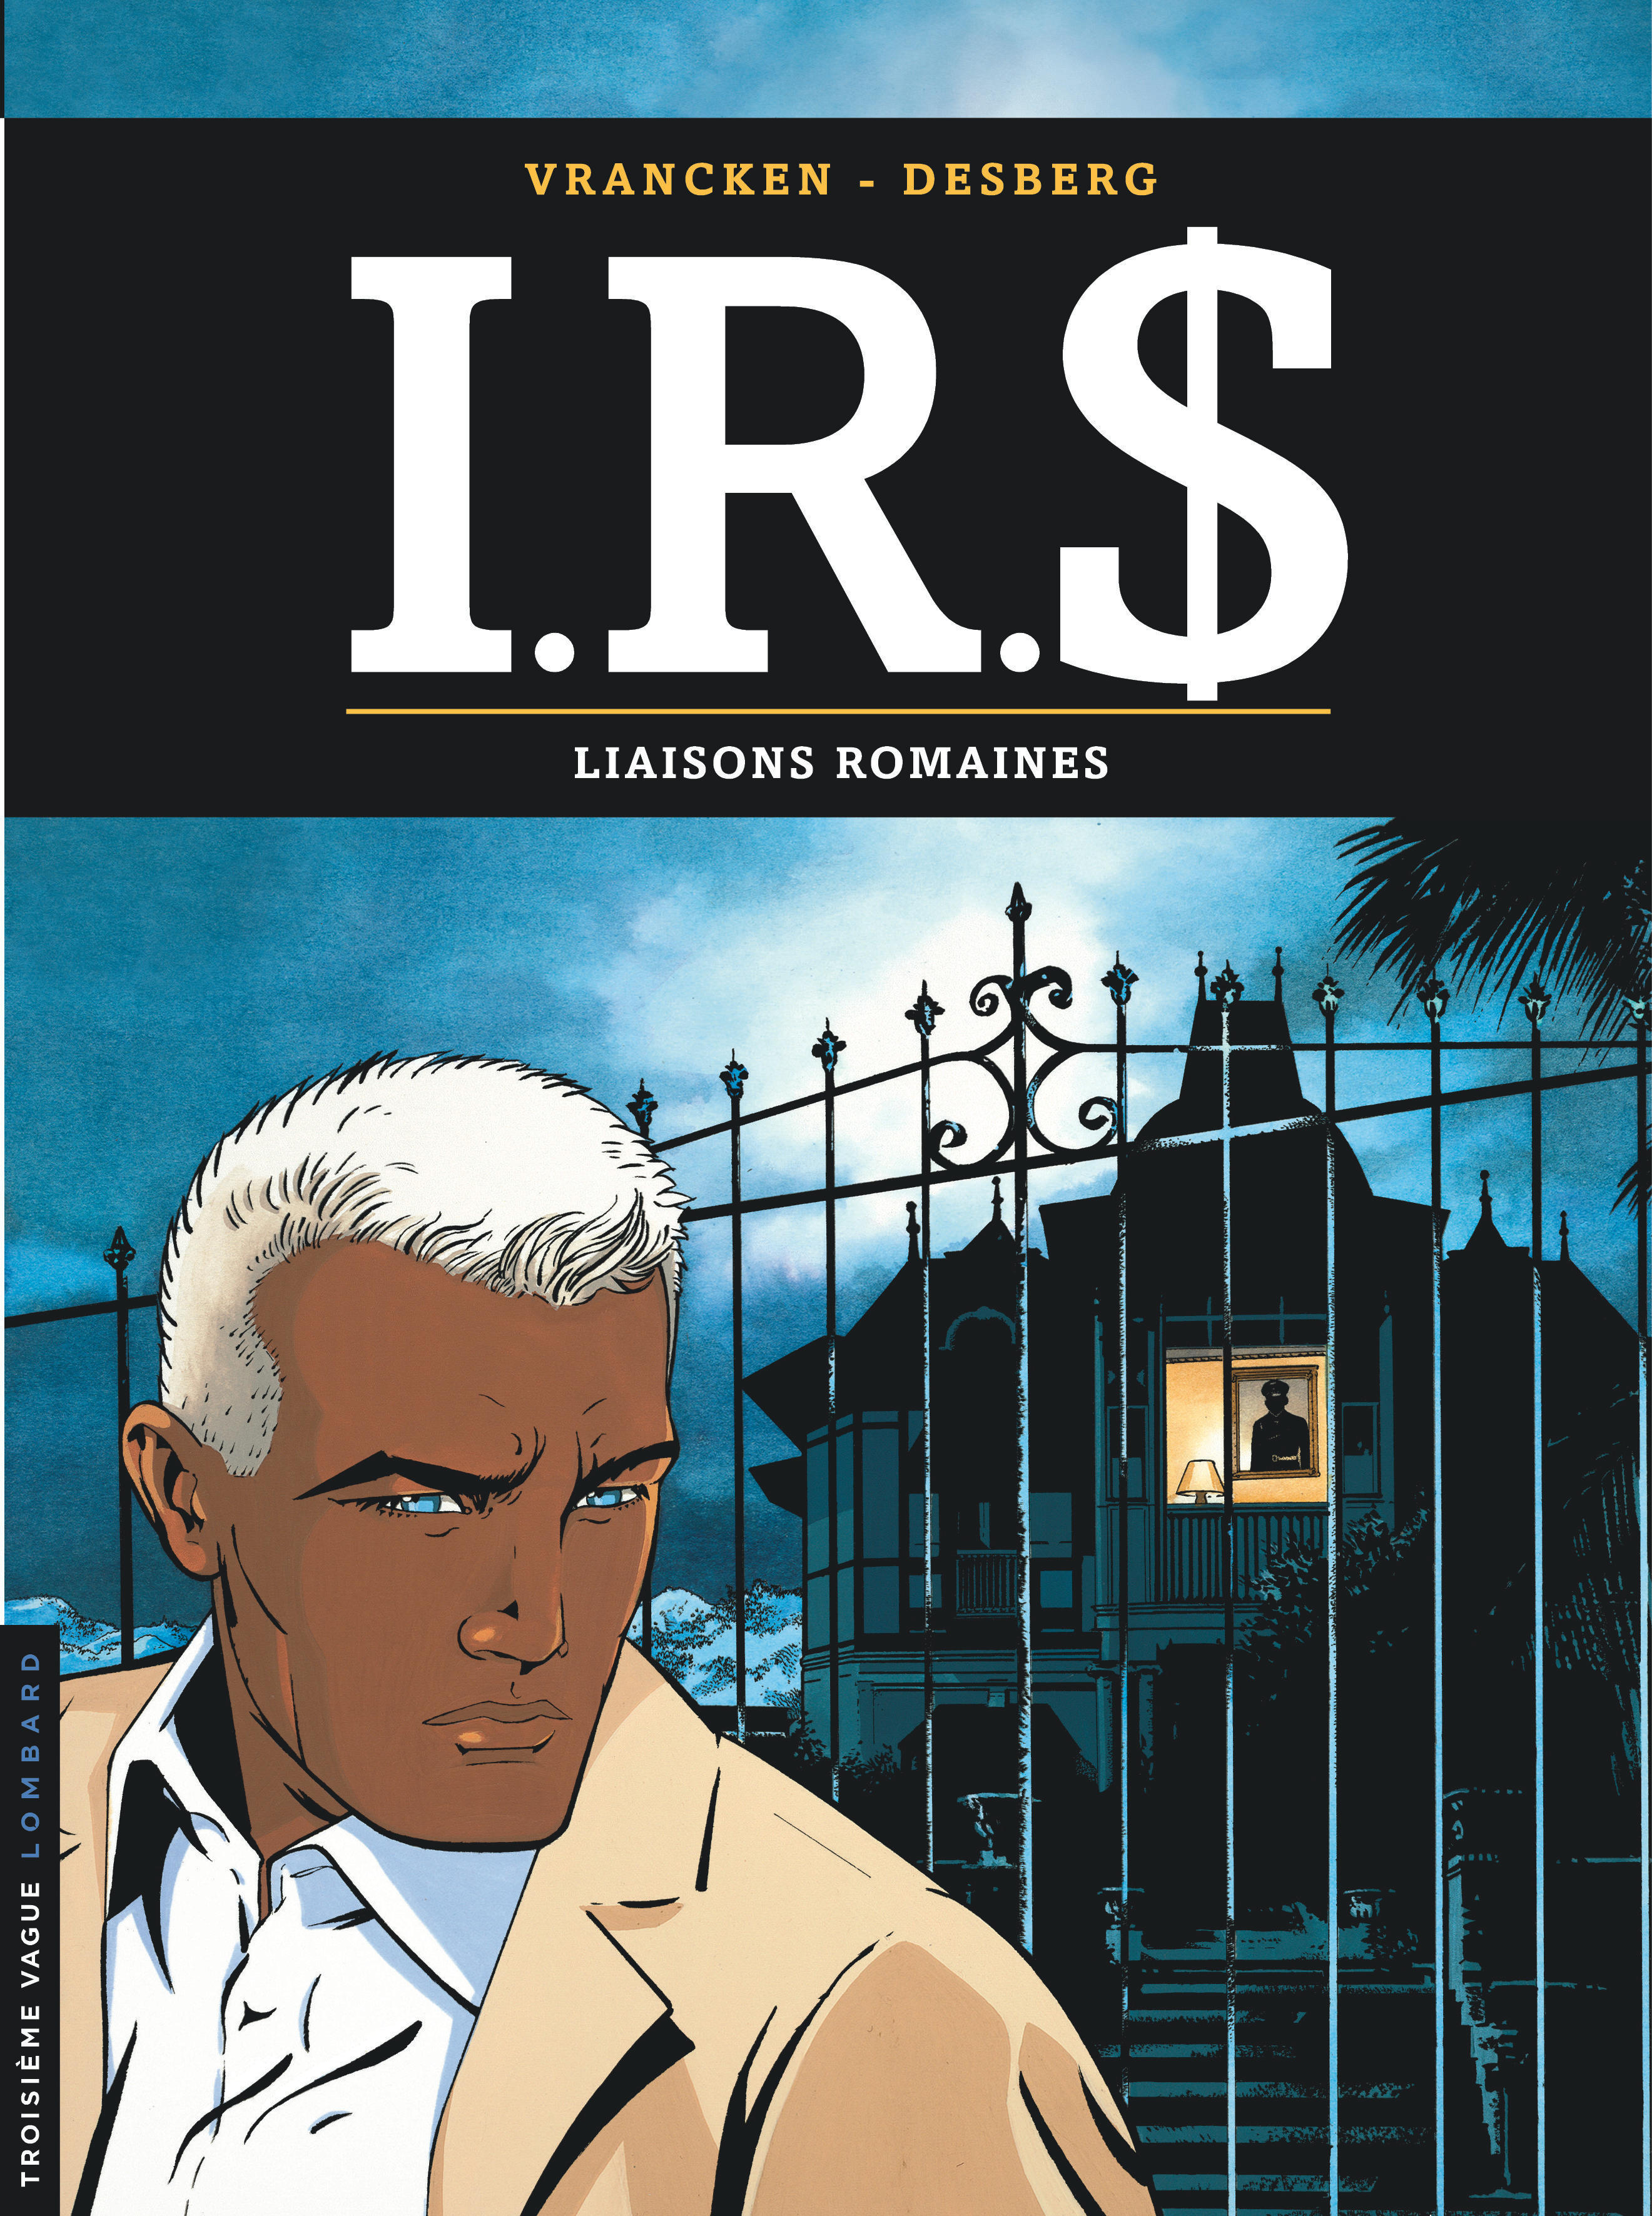 I.R.$ – Tome 9 – Liaisons romaines - couv